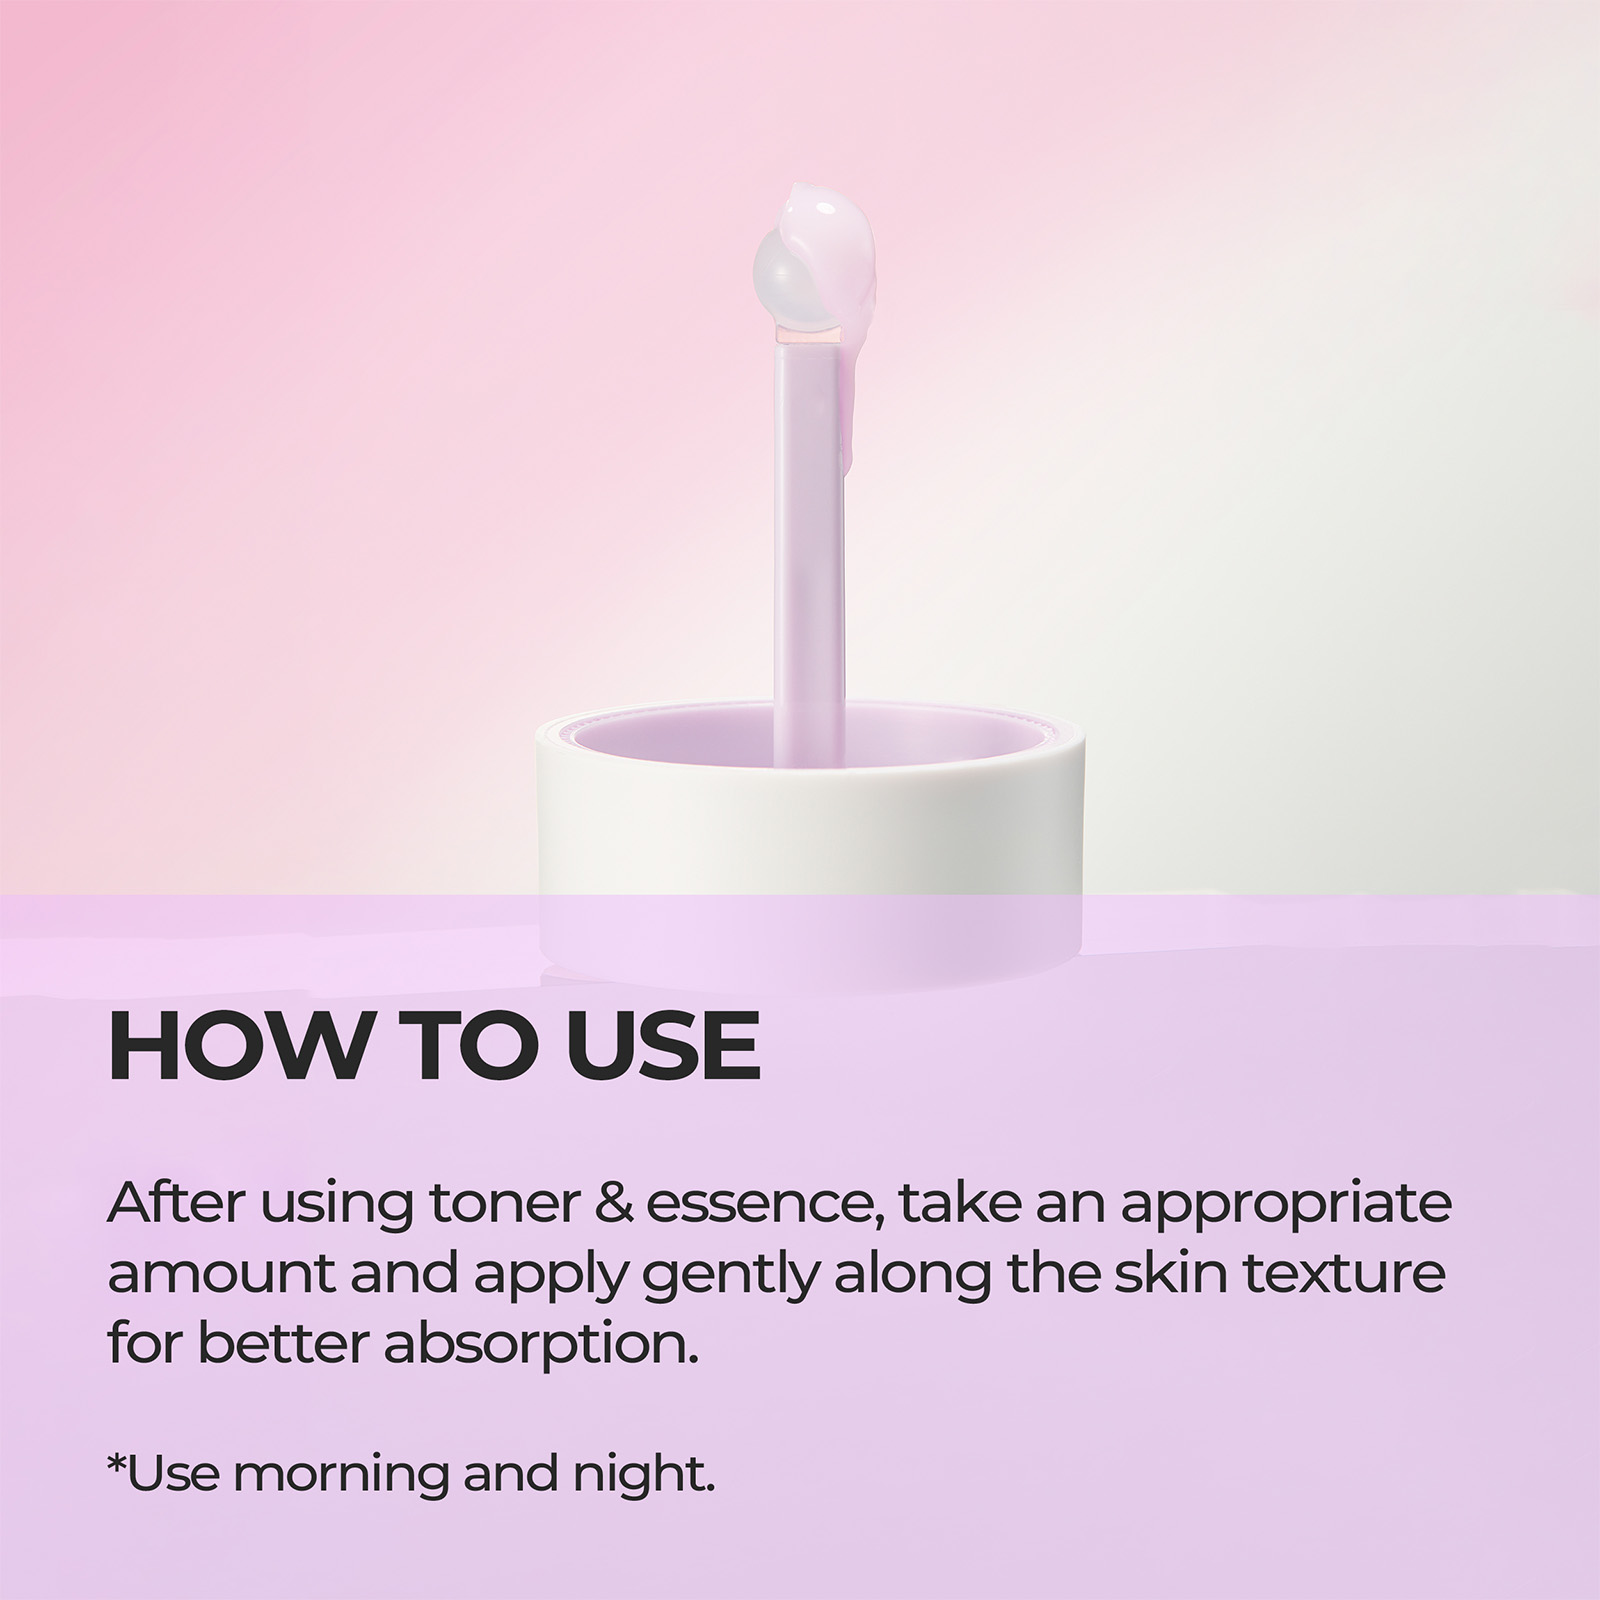 HOW TO USE After using toner & essence, take an appropriate amount and apply gently along the skin texture for better absorption. *Use morning and night.